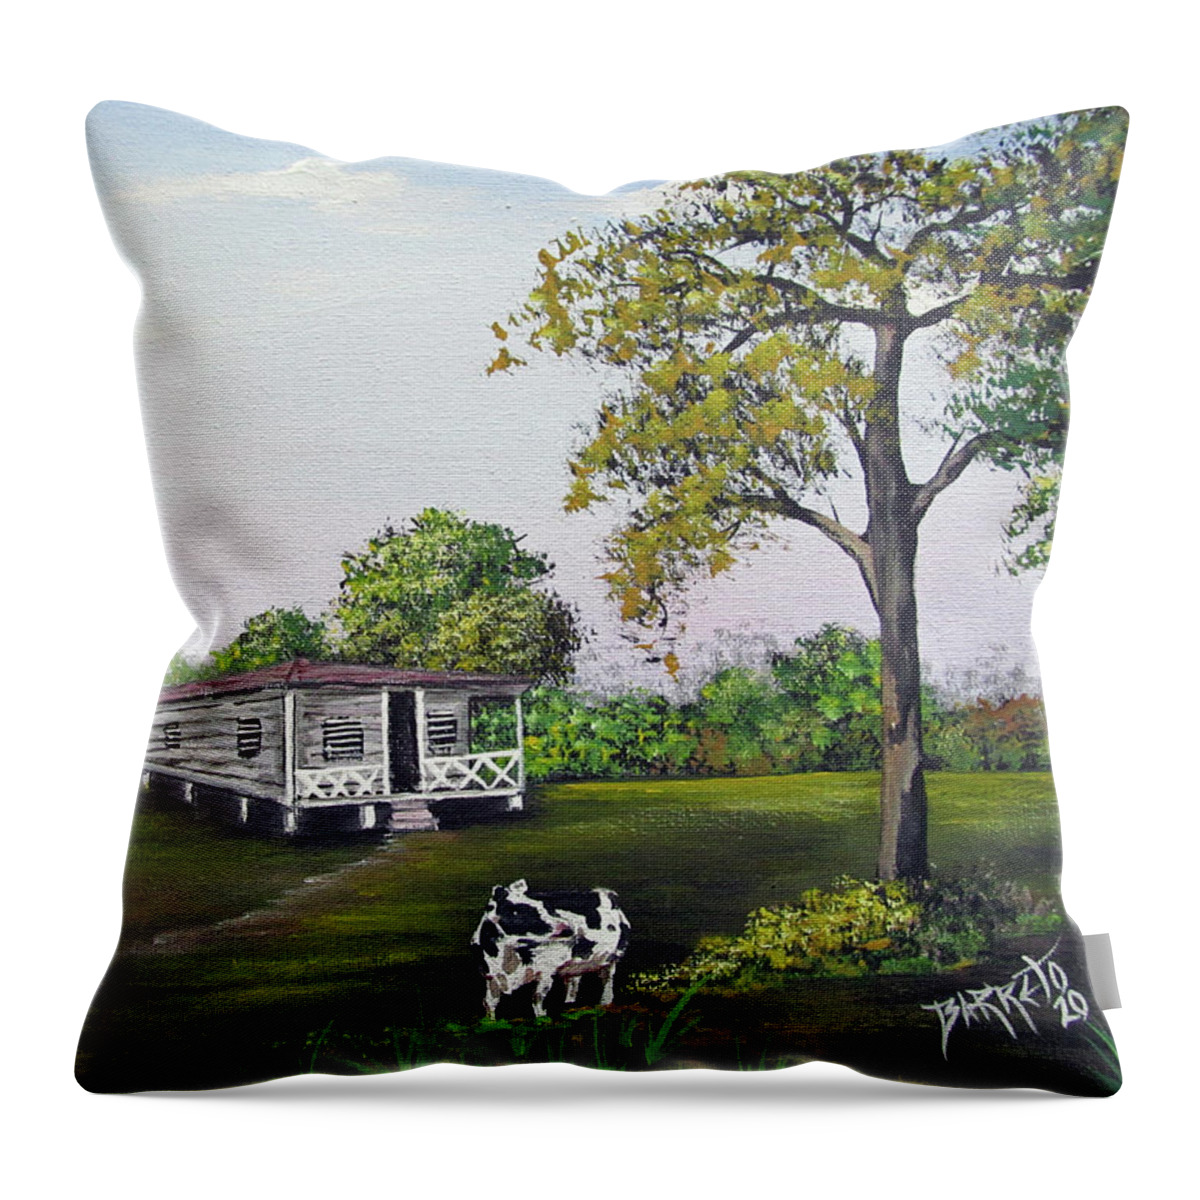 Cow Throw Pillow featuring the painting By The House by Gloria E Barreto-Rodriguez